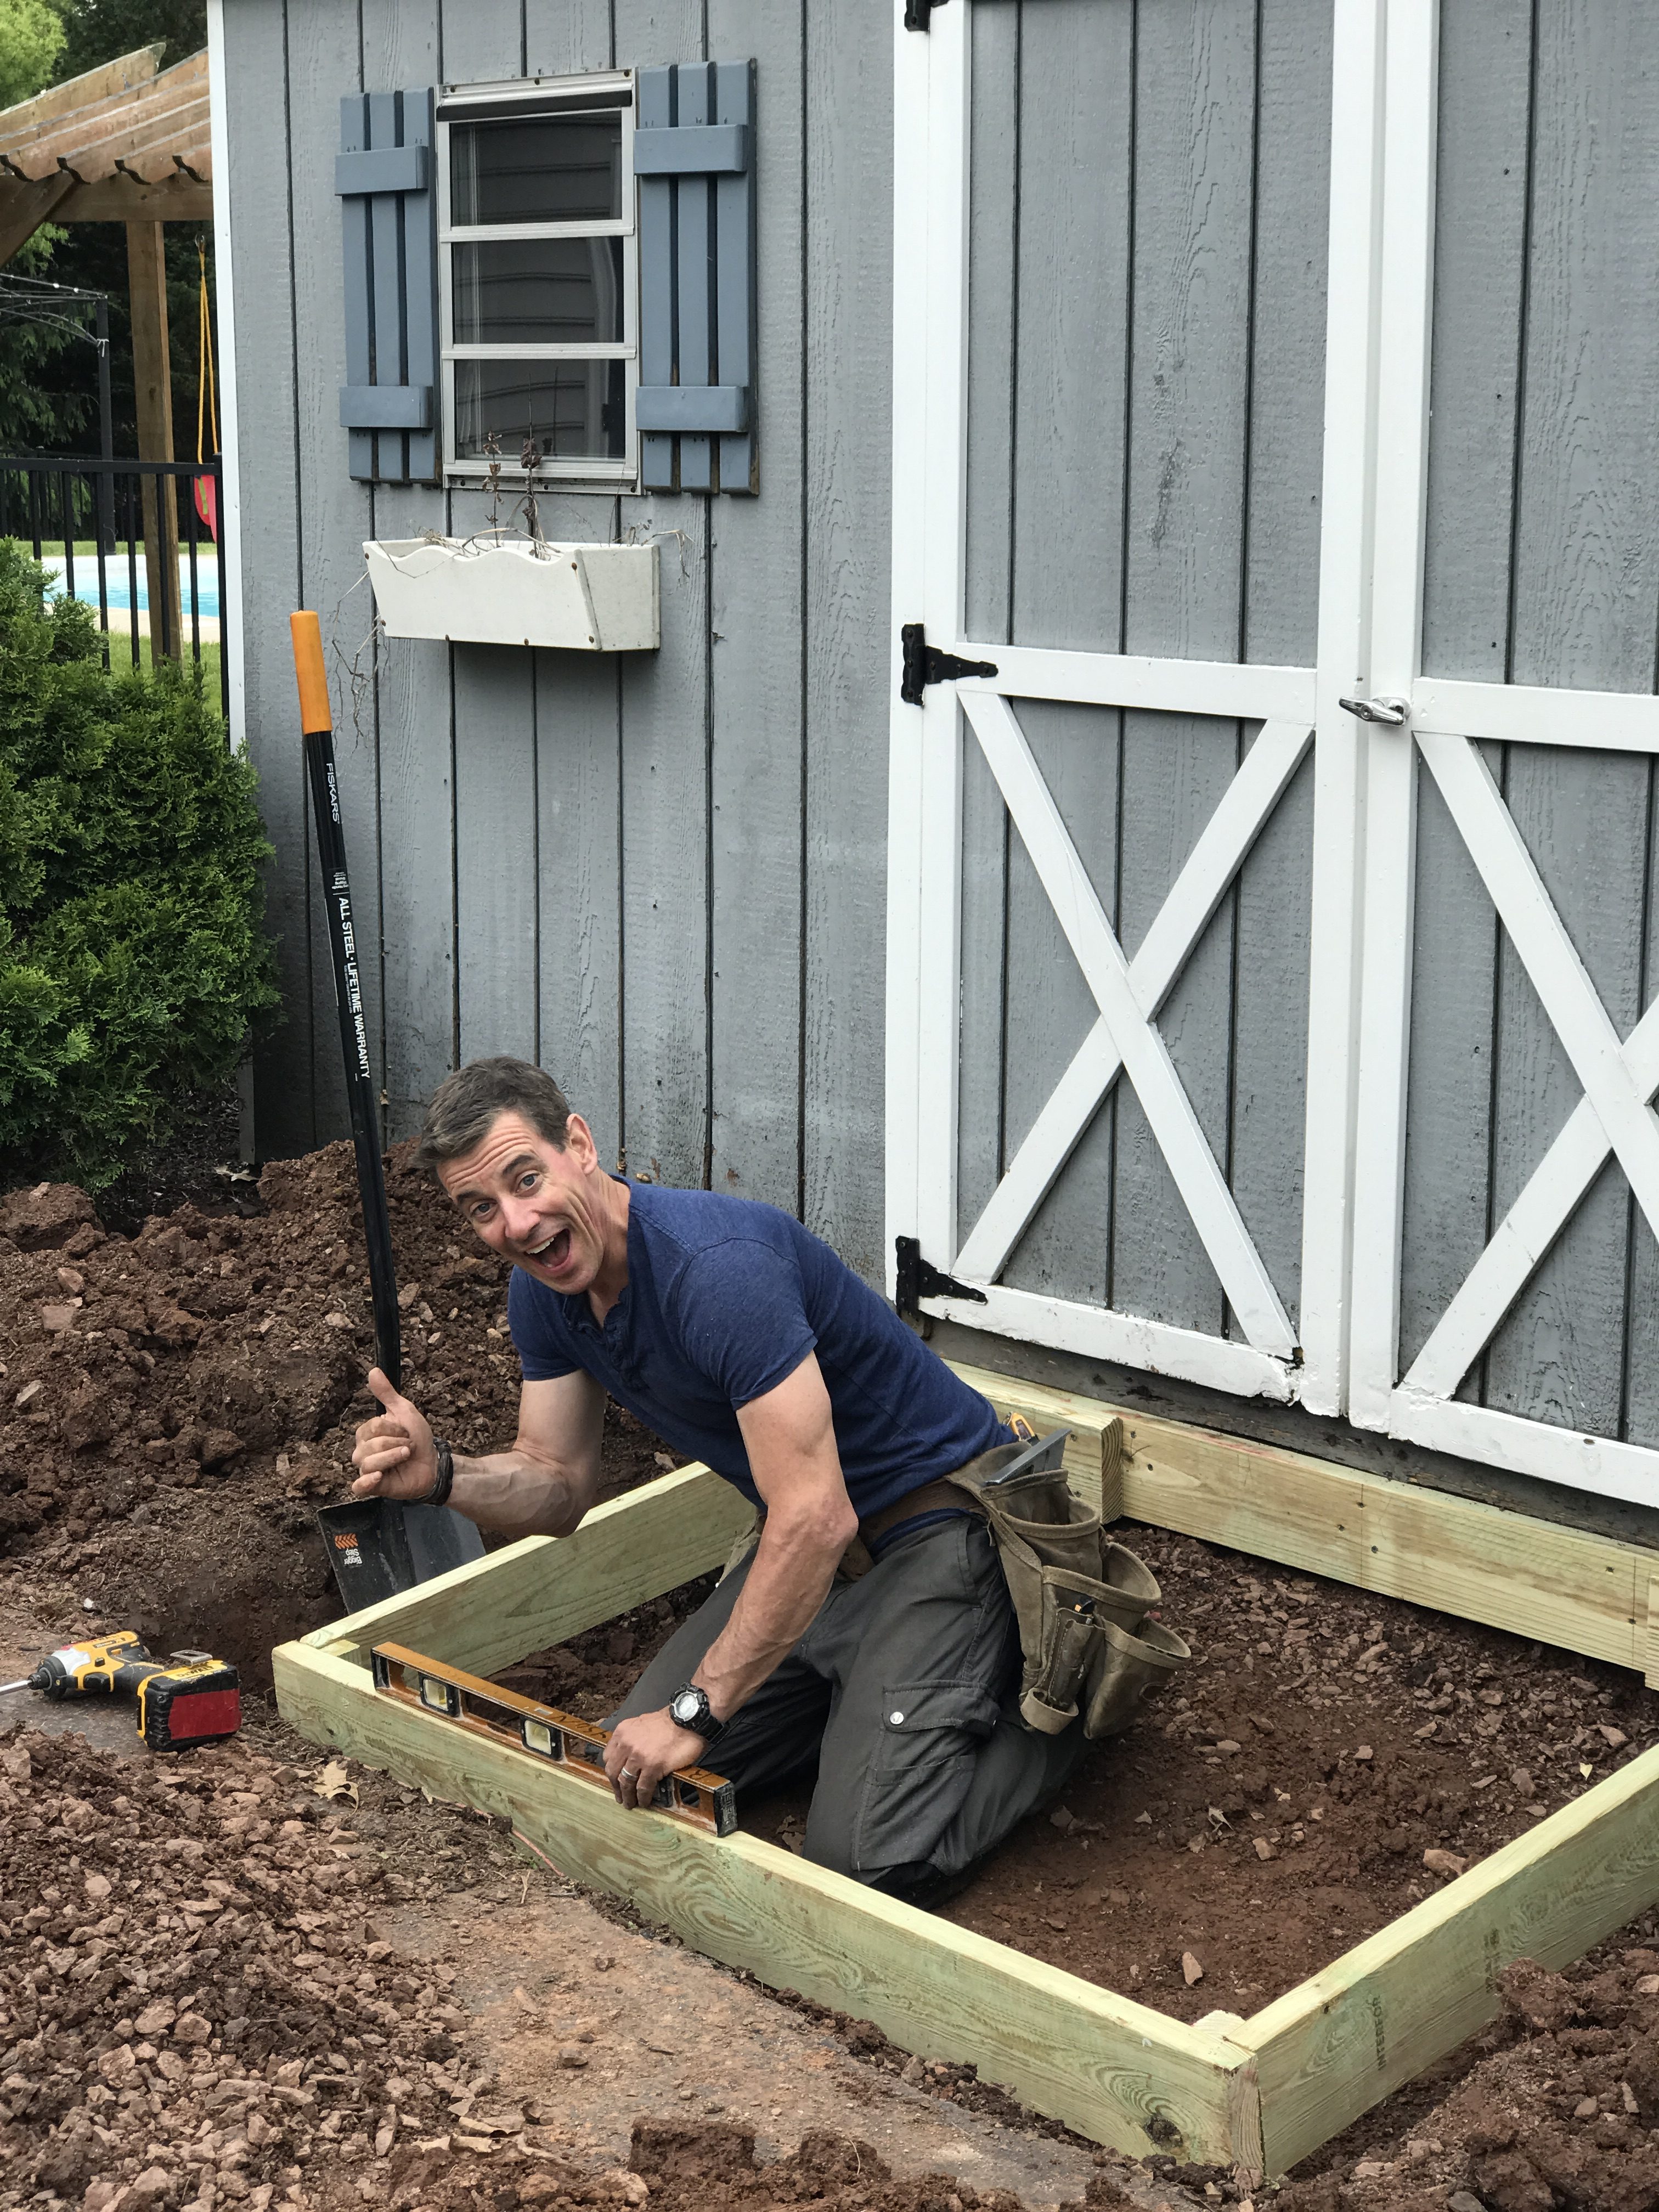 Weekend DIY Projects You Can Totally Do: How to Make a Shed Ramp